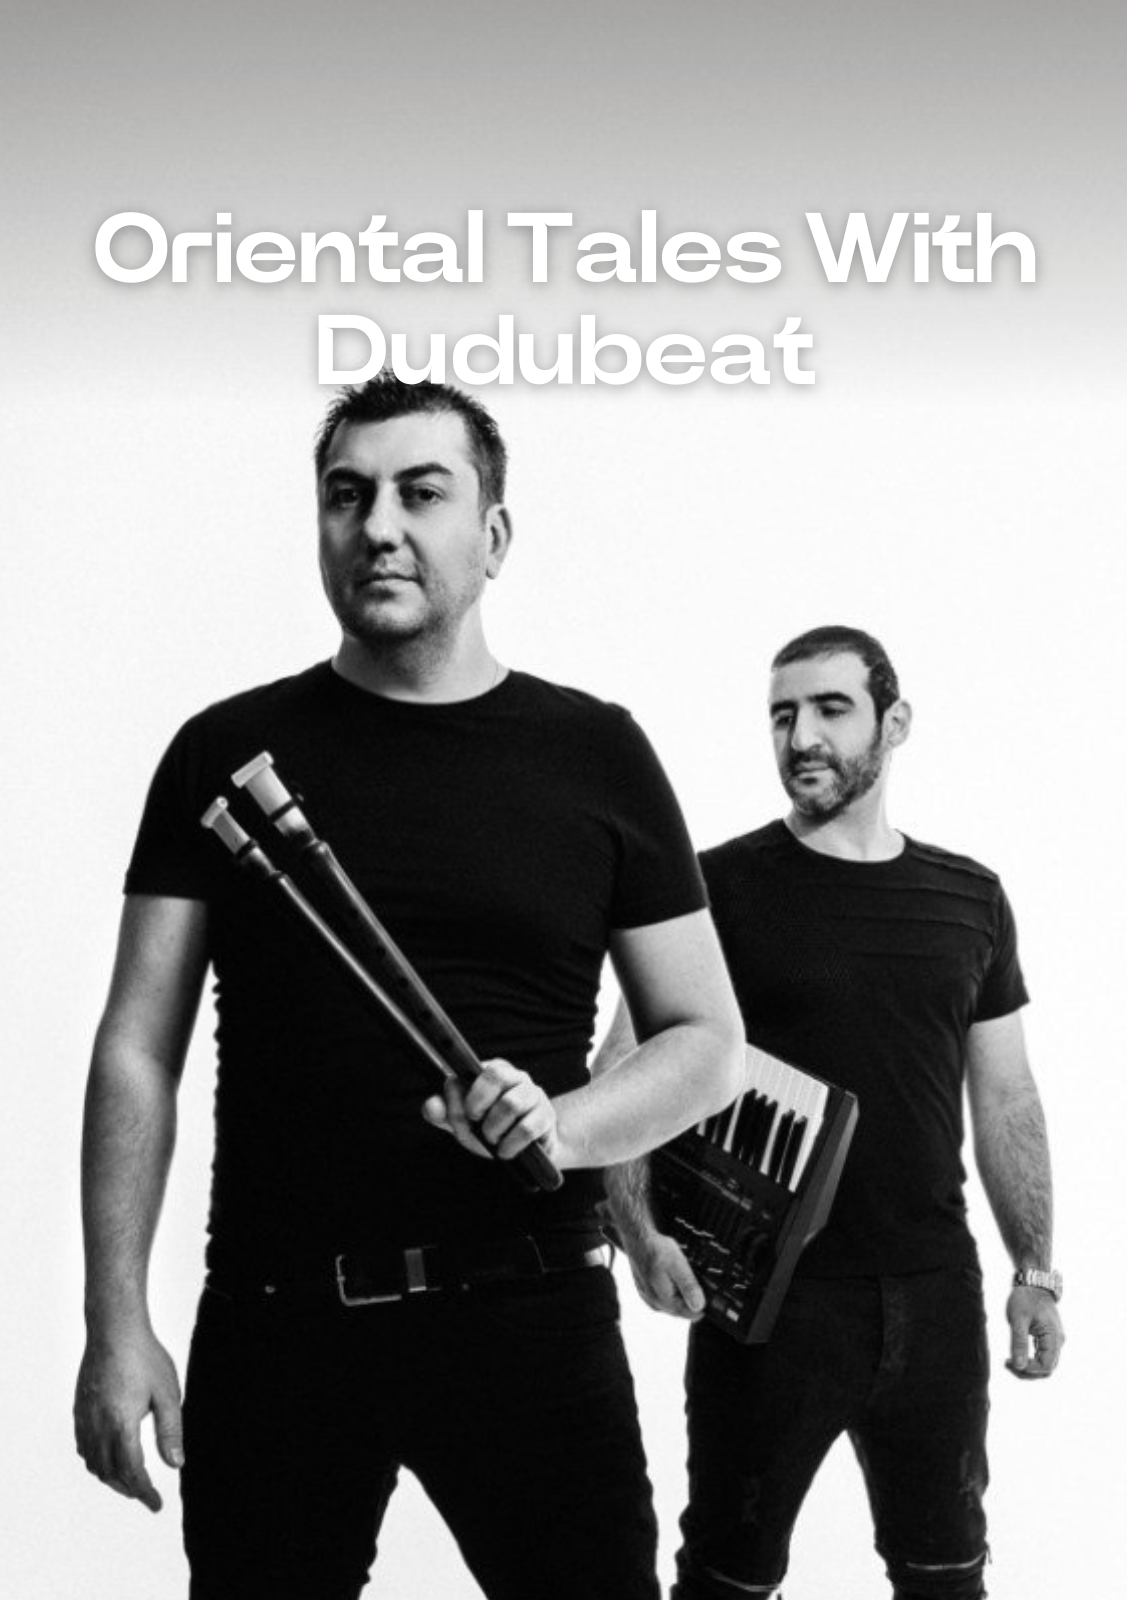 Oriental Tales with DudubeatRedefining modern music with ancient soul at 360°